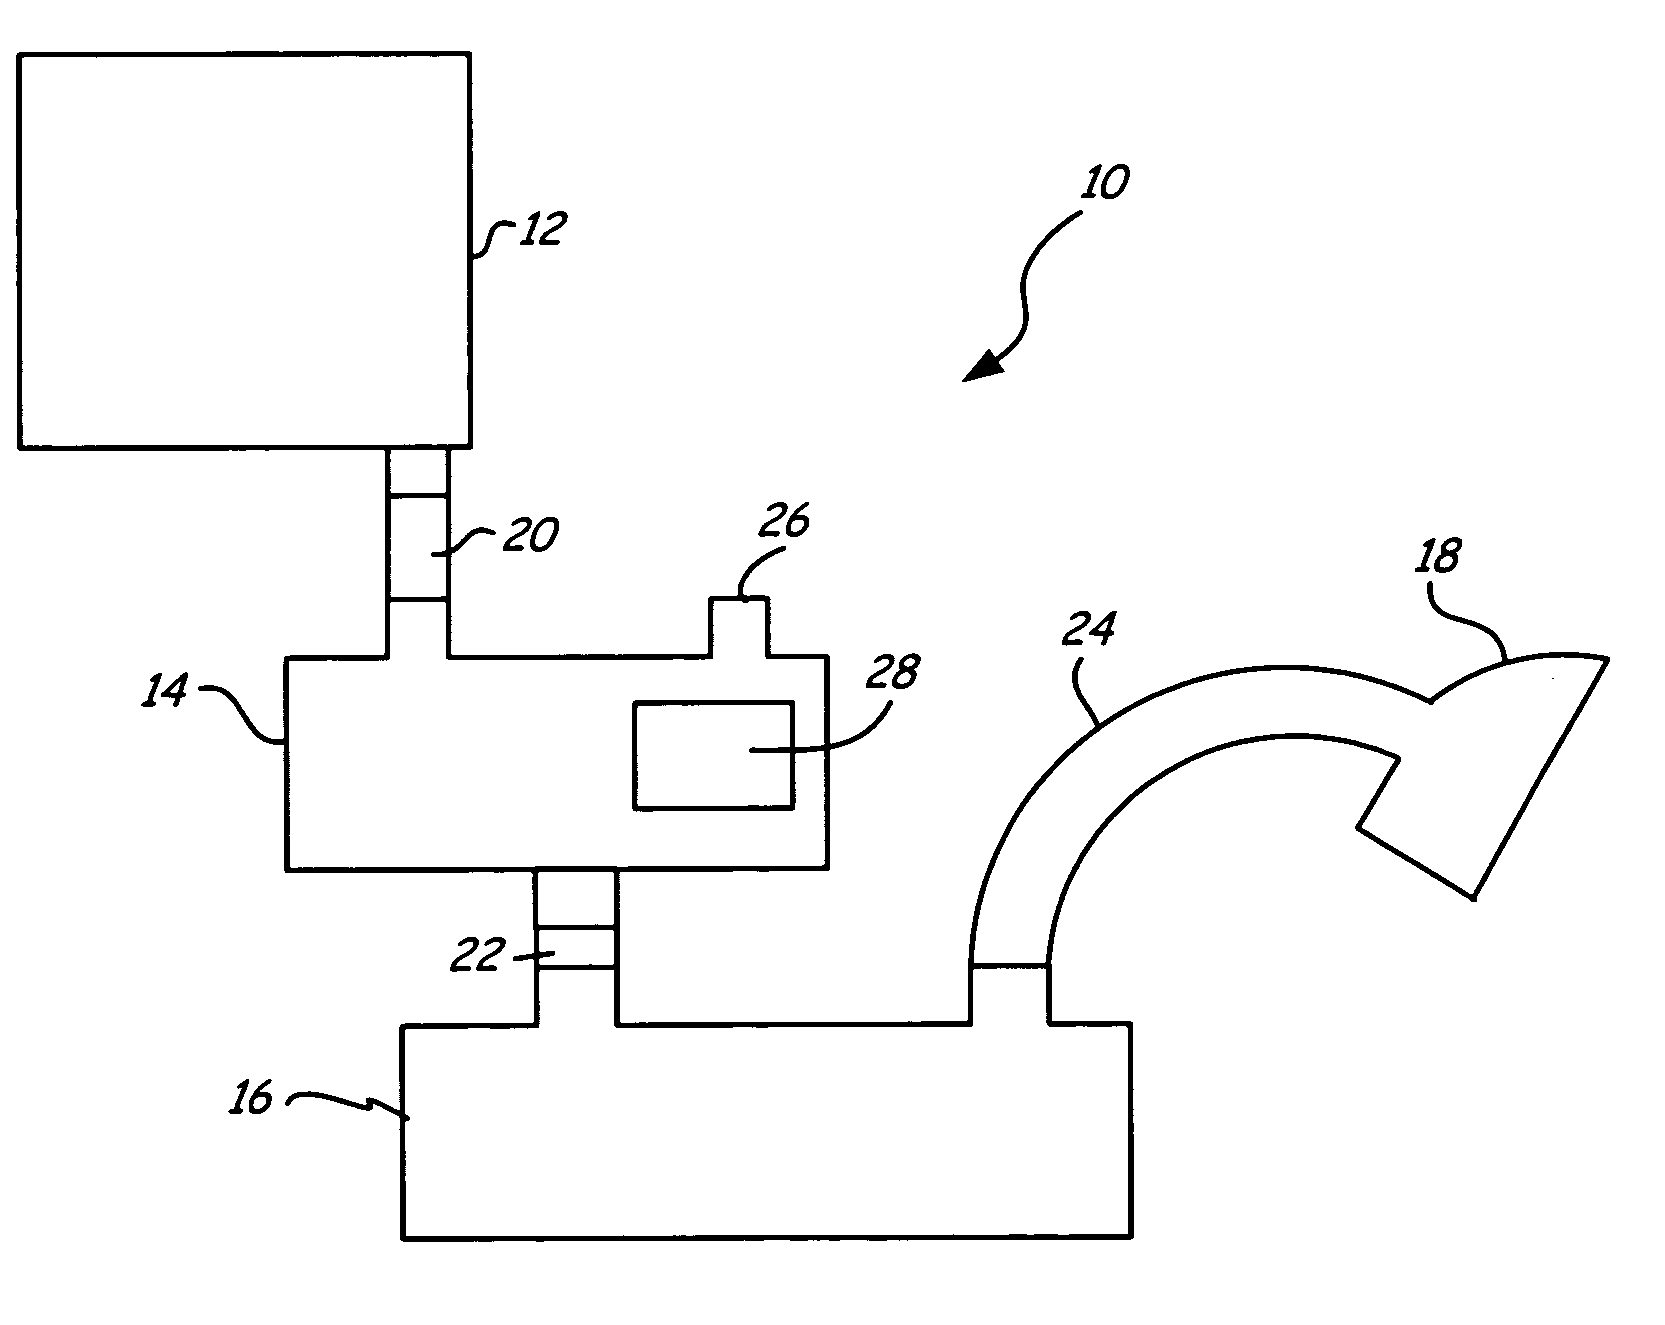 Method and apparatus for delivering an additive with a CPAP machine